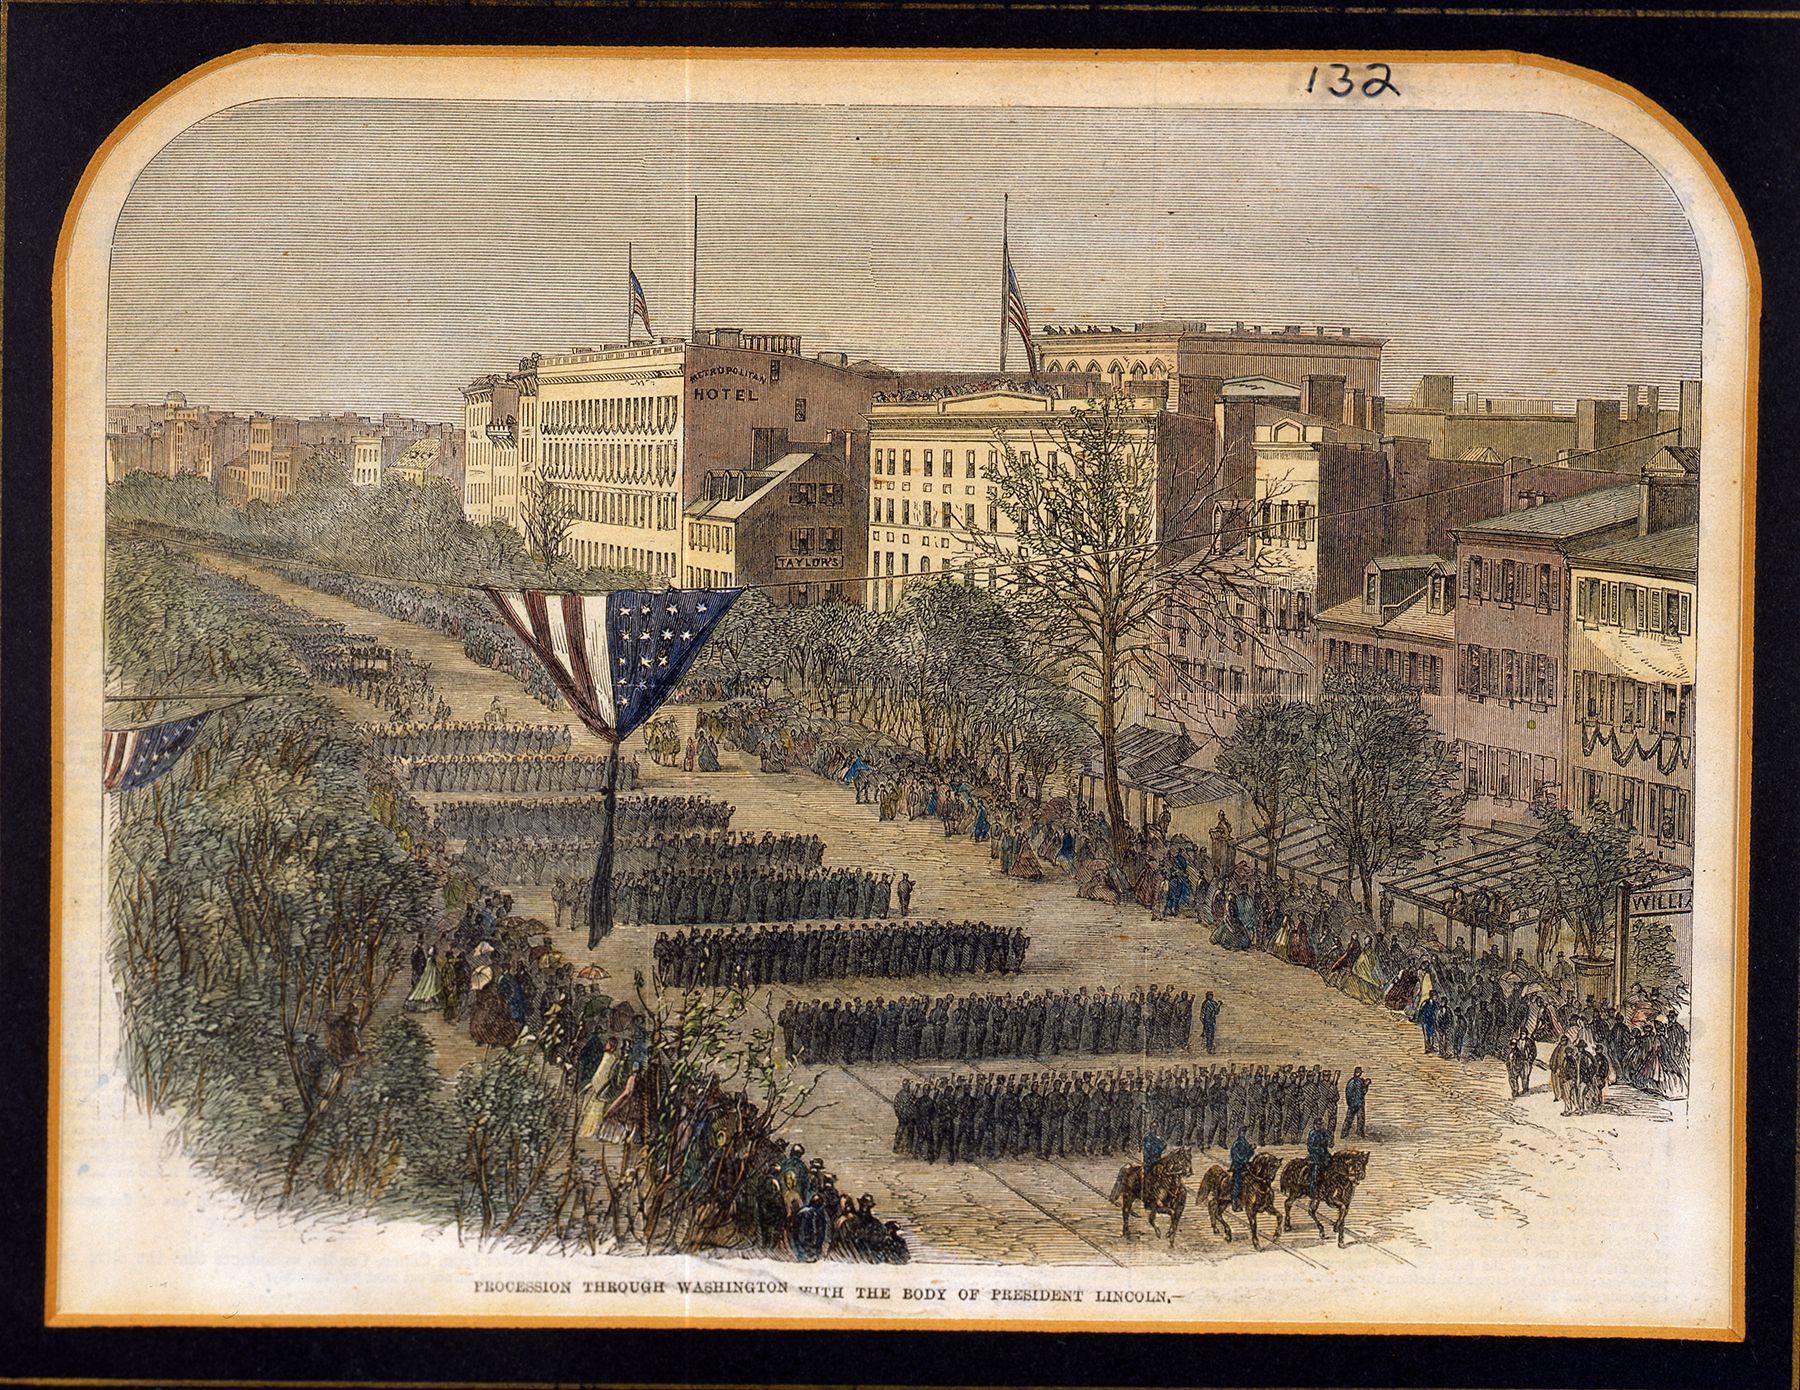 Procession Through Washington with the Body of President Lincoln